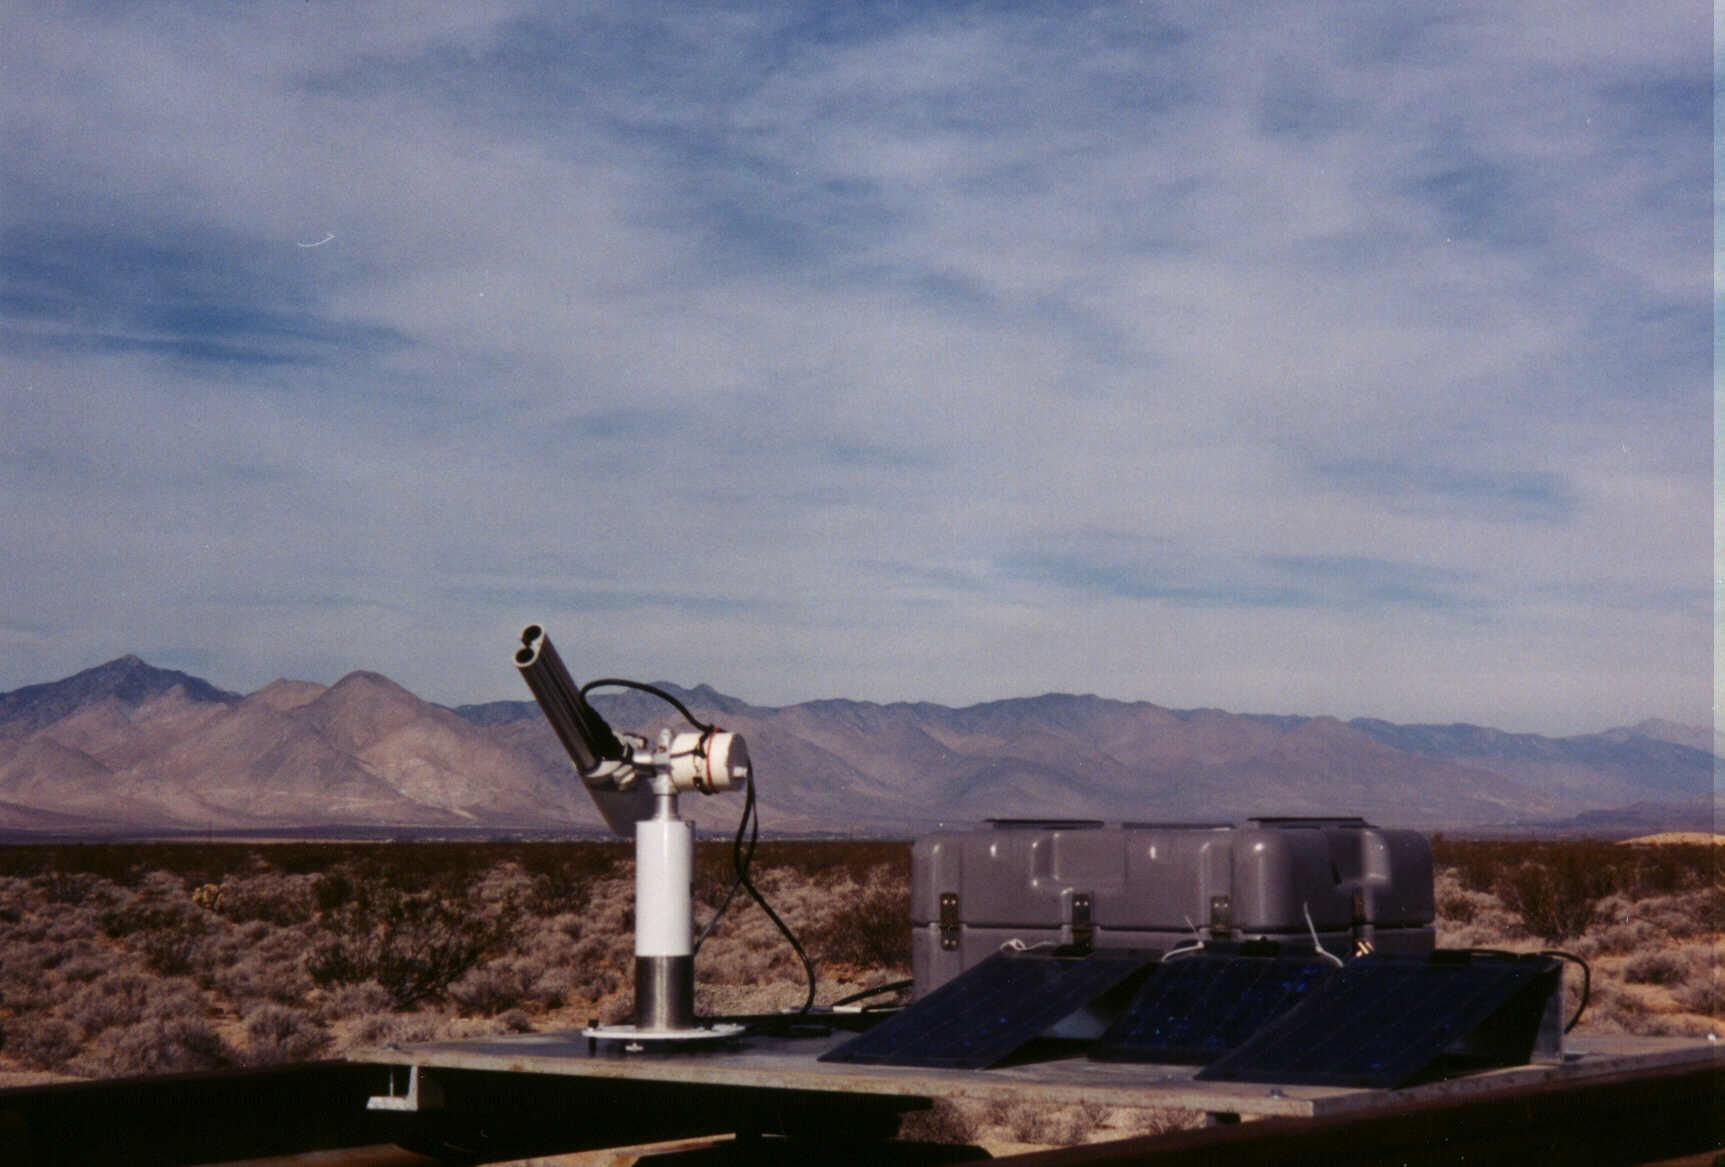 A view of the sun photometer and site